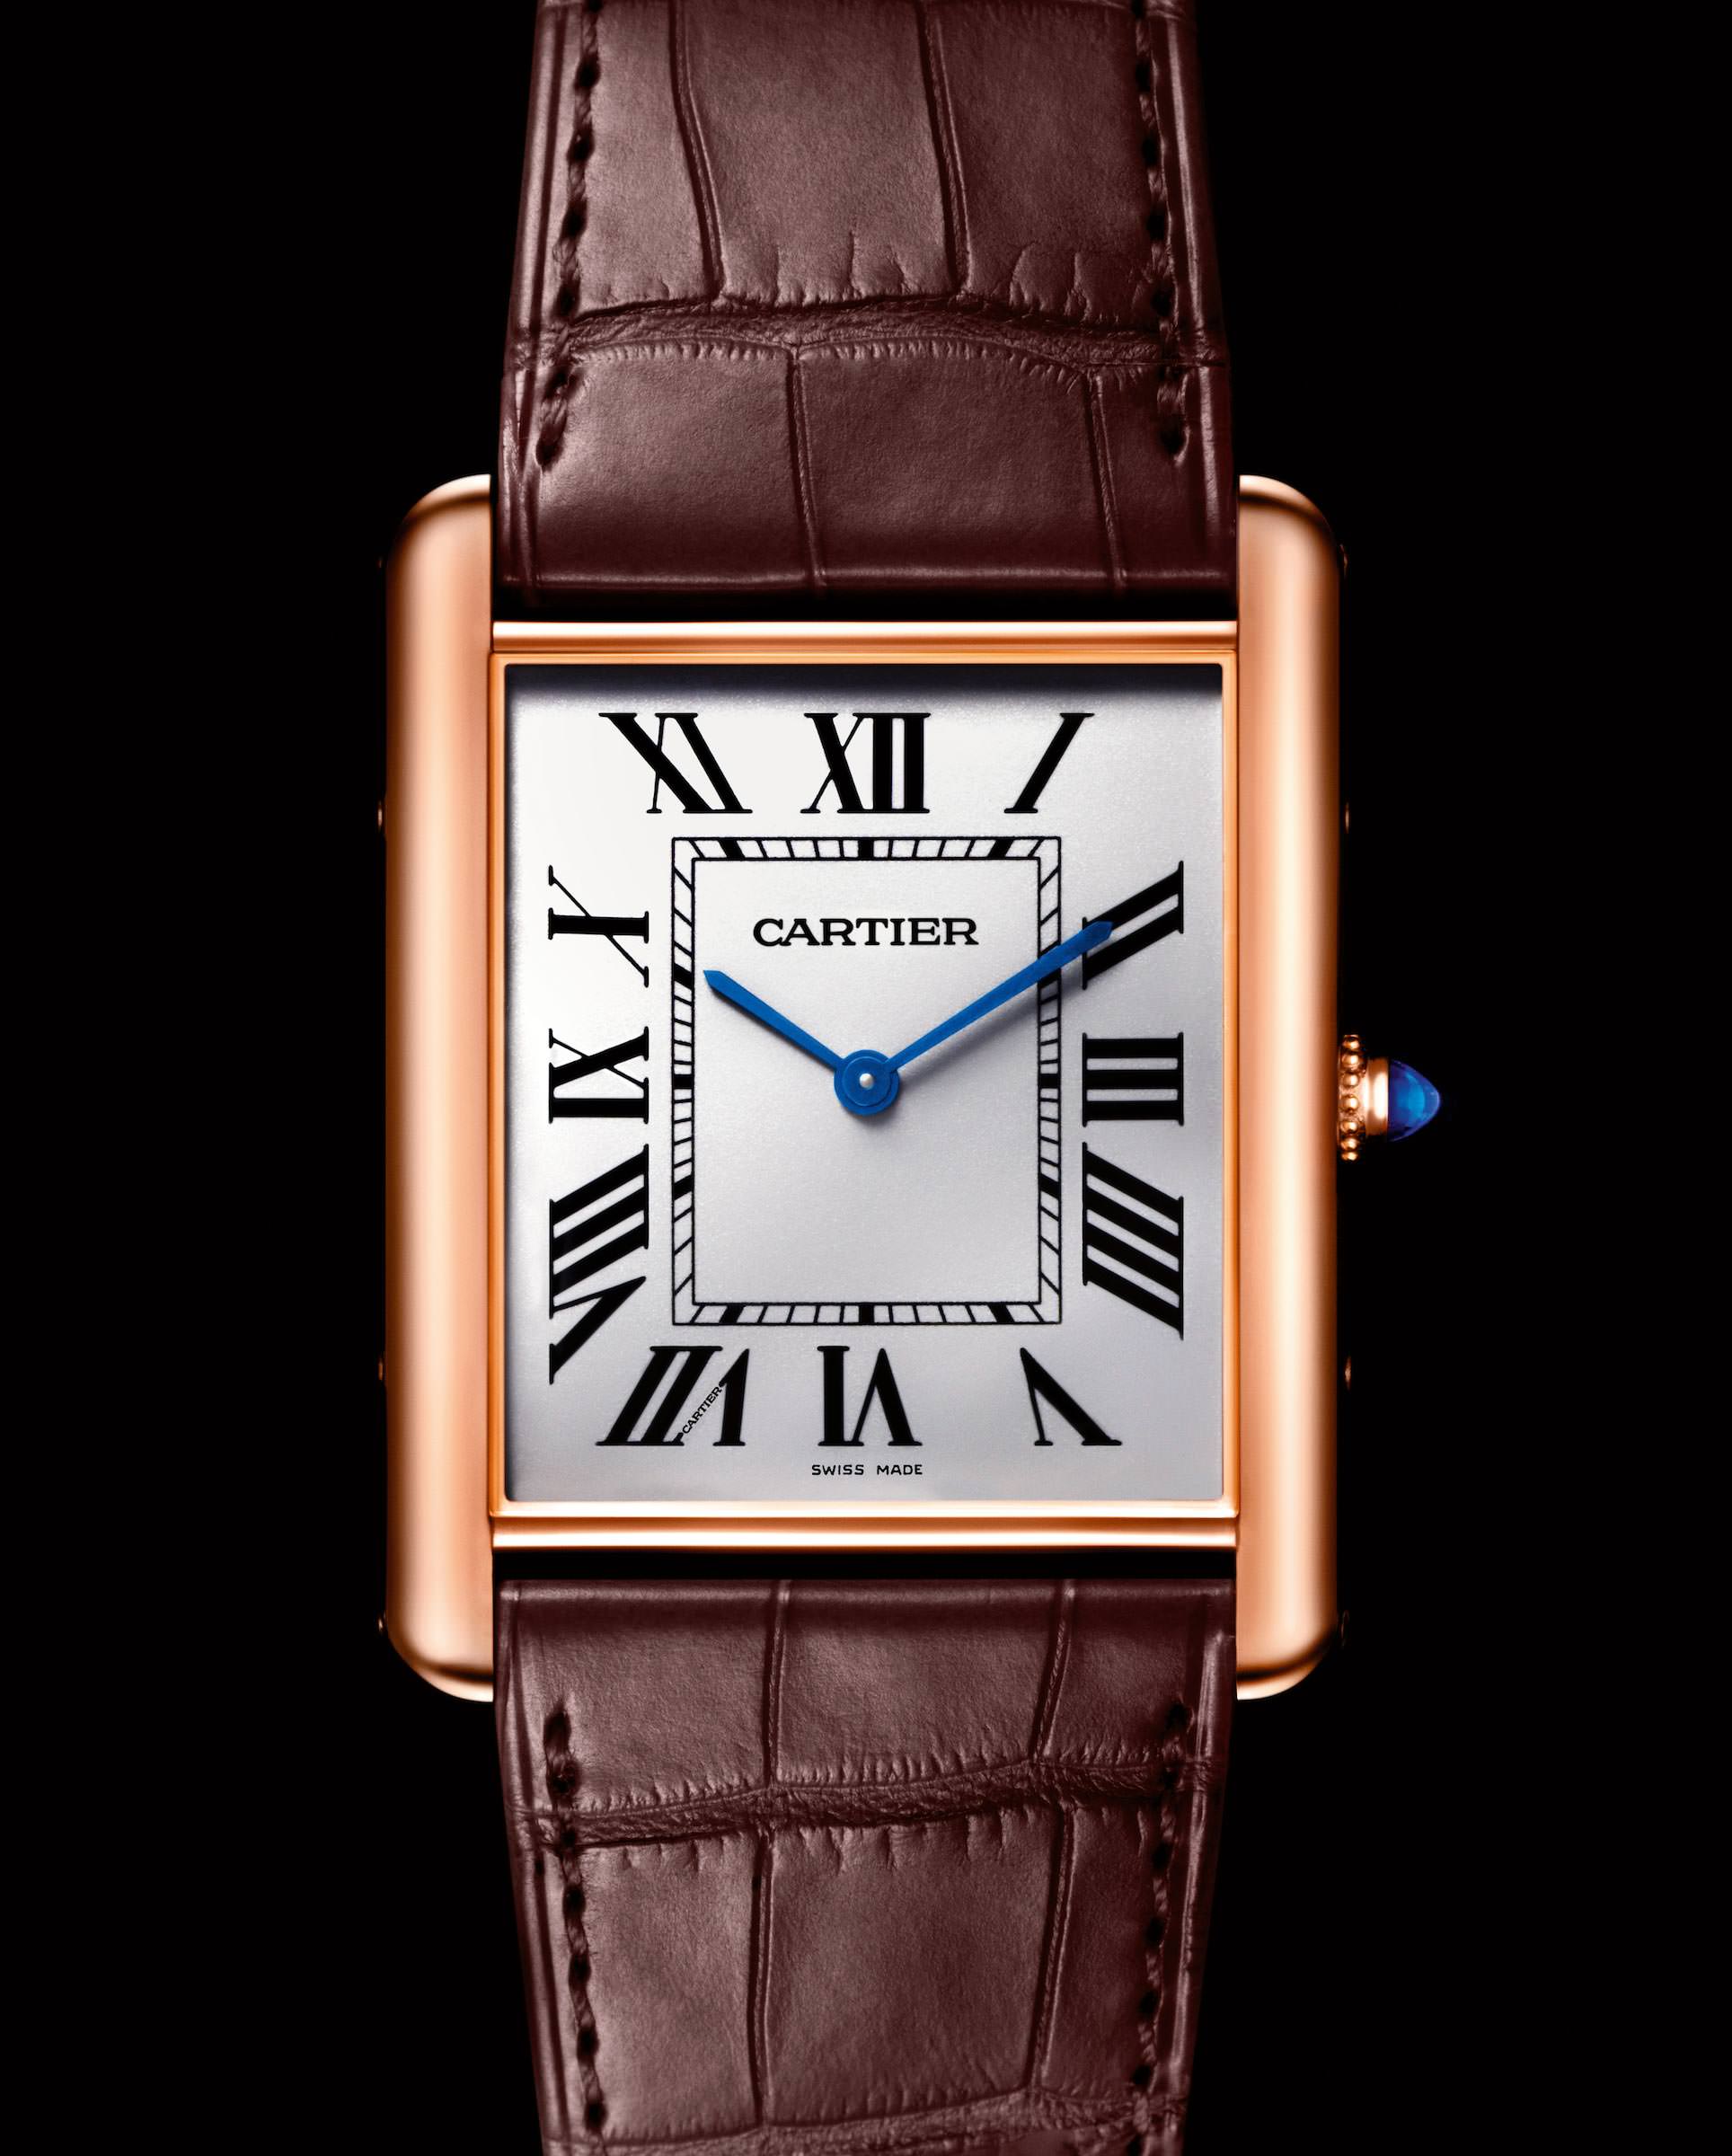 Watch Cartier Still Life Photography, photographed by Still Life ...